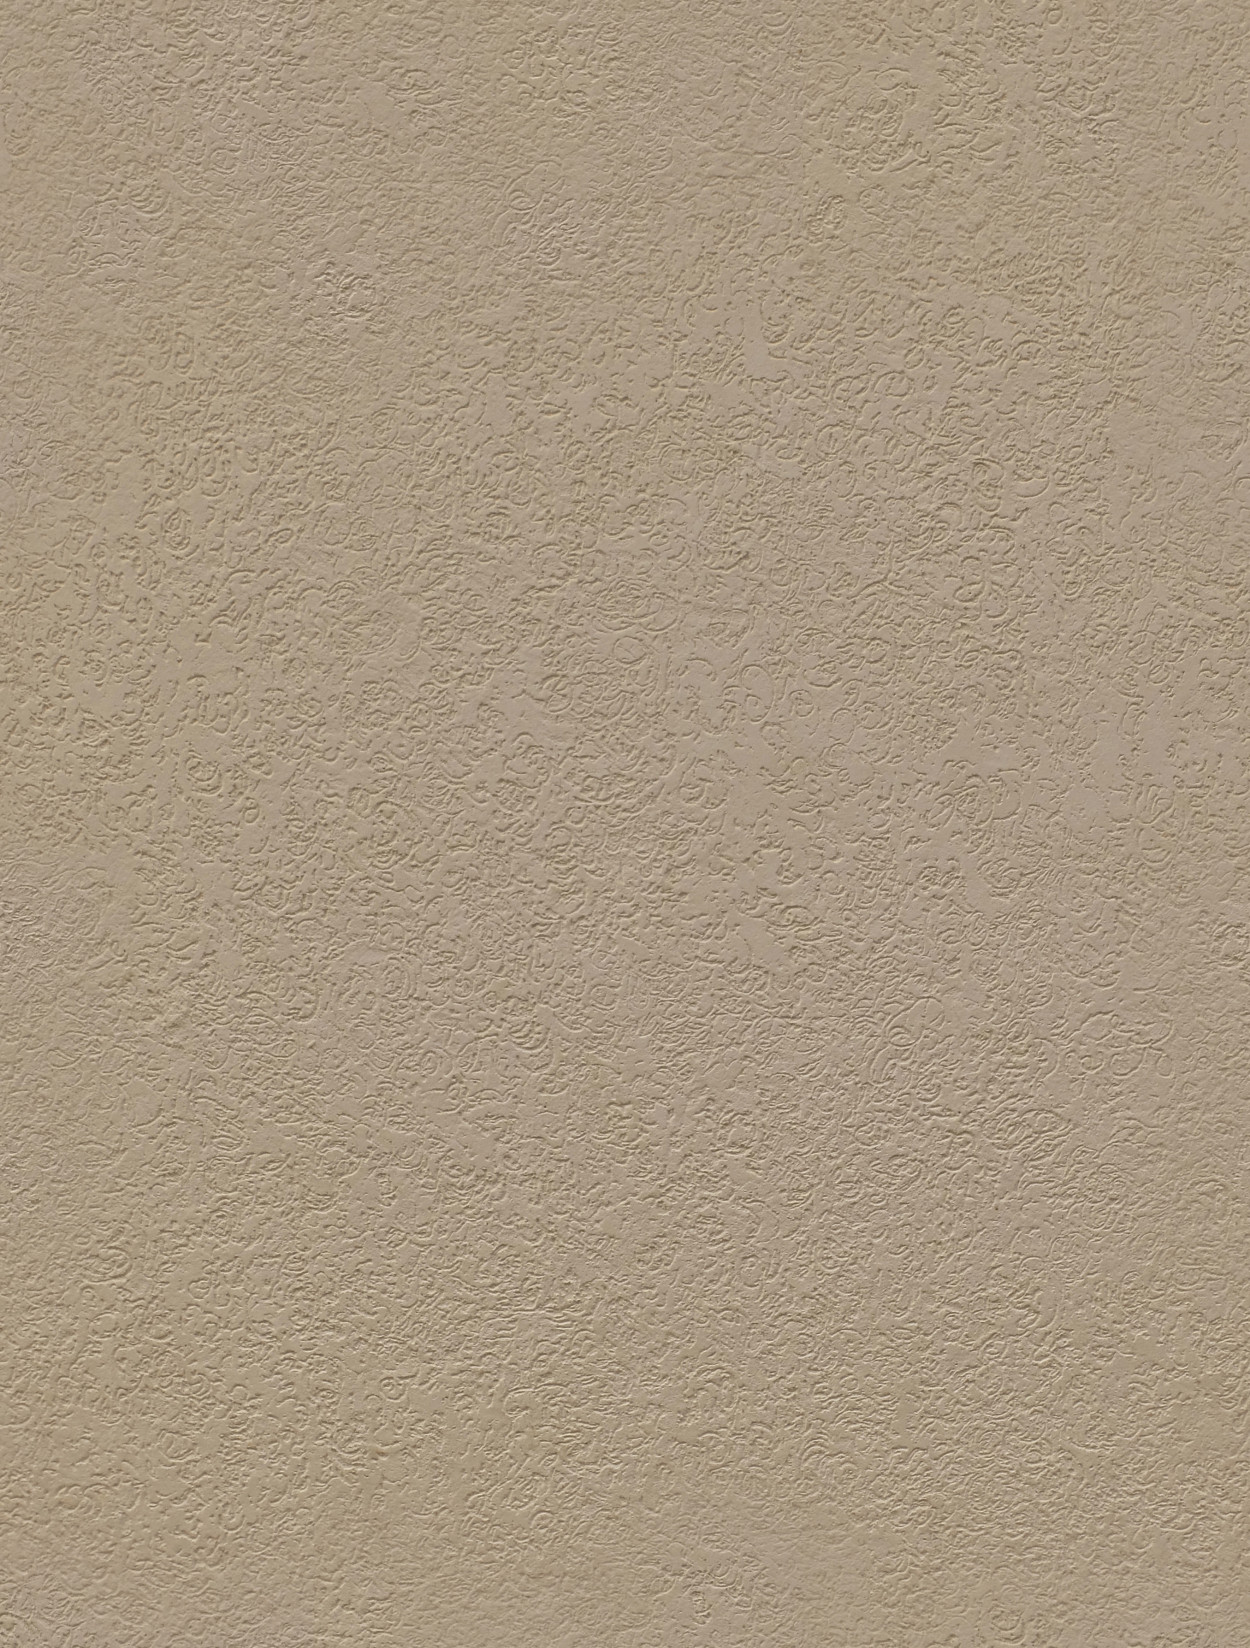 A seamless patterned stucco texture for use in architectural drawings and 3D models